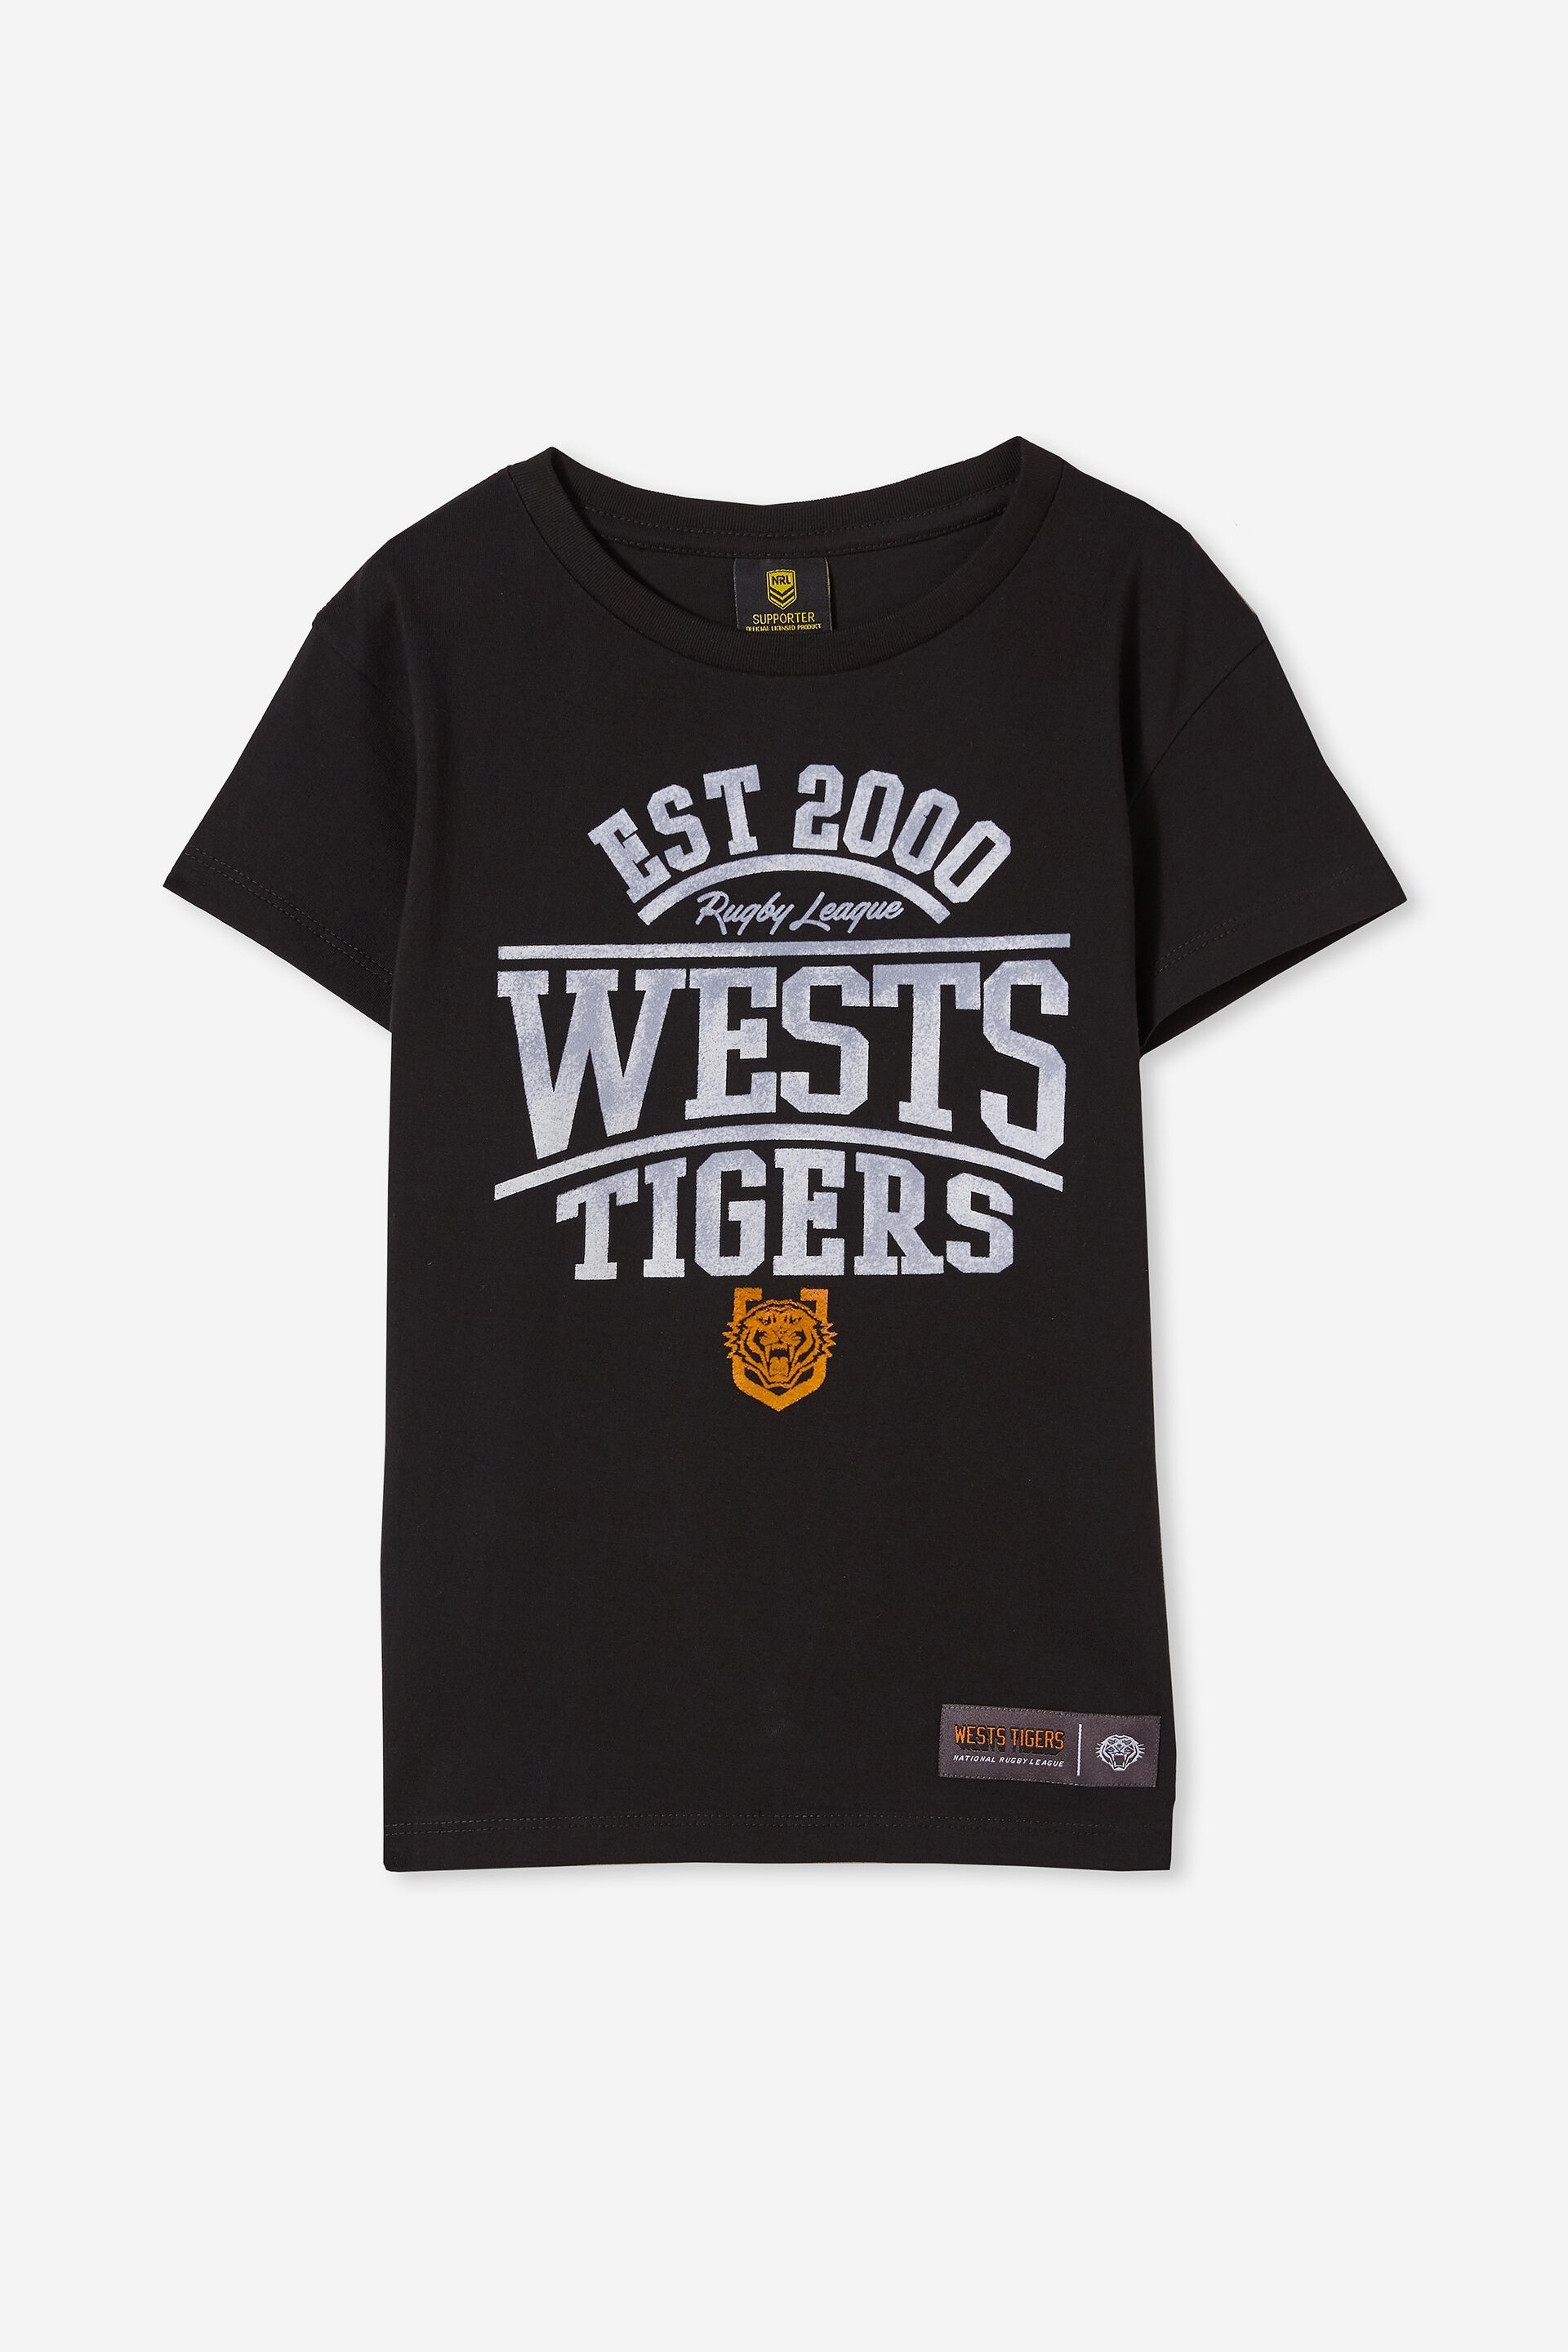 Wests Tigers NRL 2021 Cotton On Block Track Pants Sizes S-2XL! 